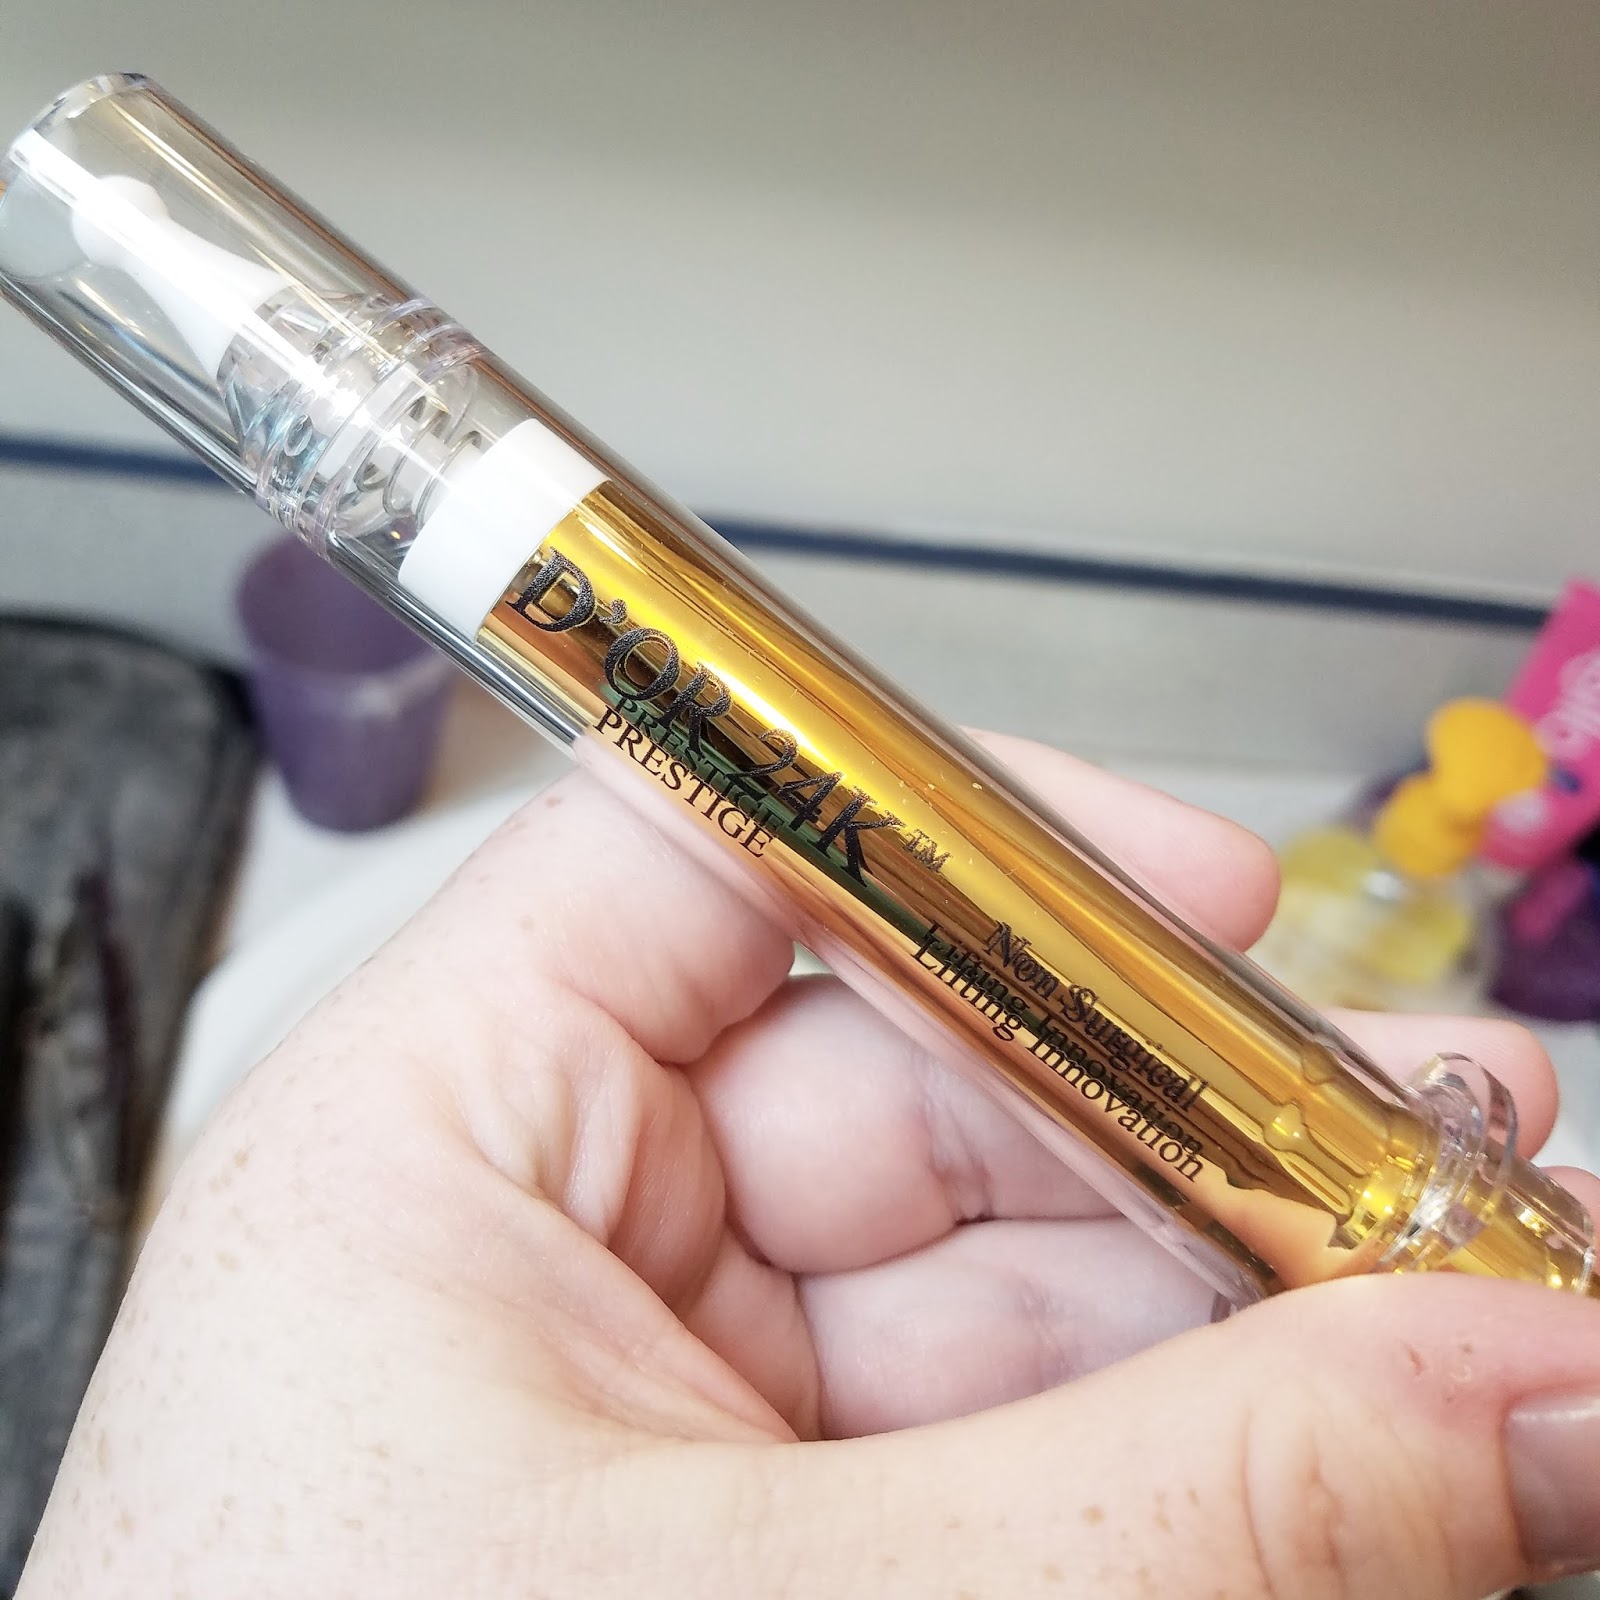 D'OR24K Non-Surgical Lifting Syringe Review